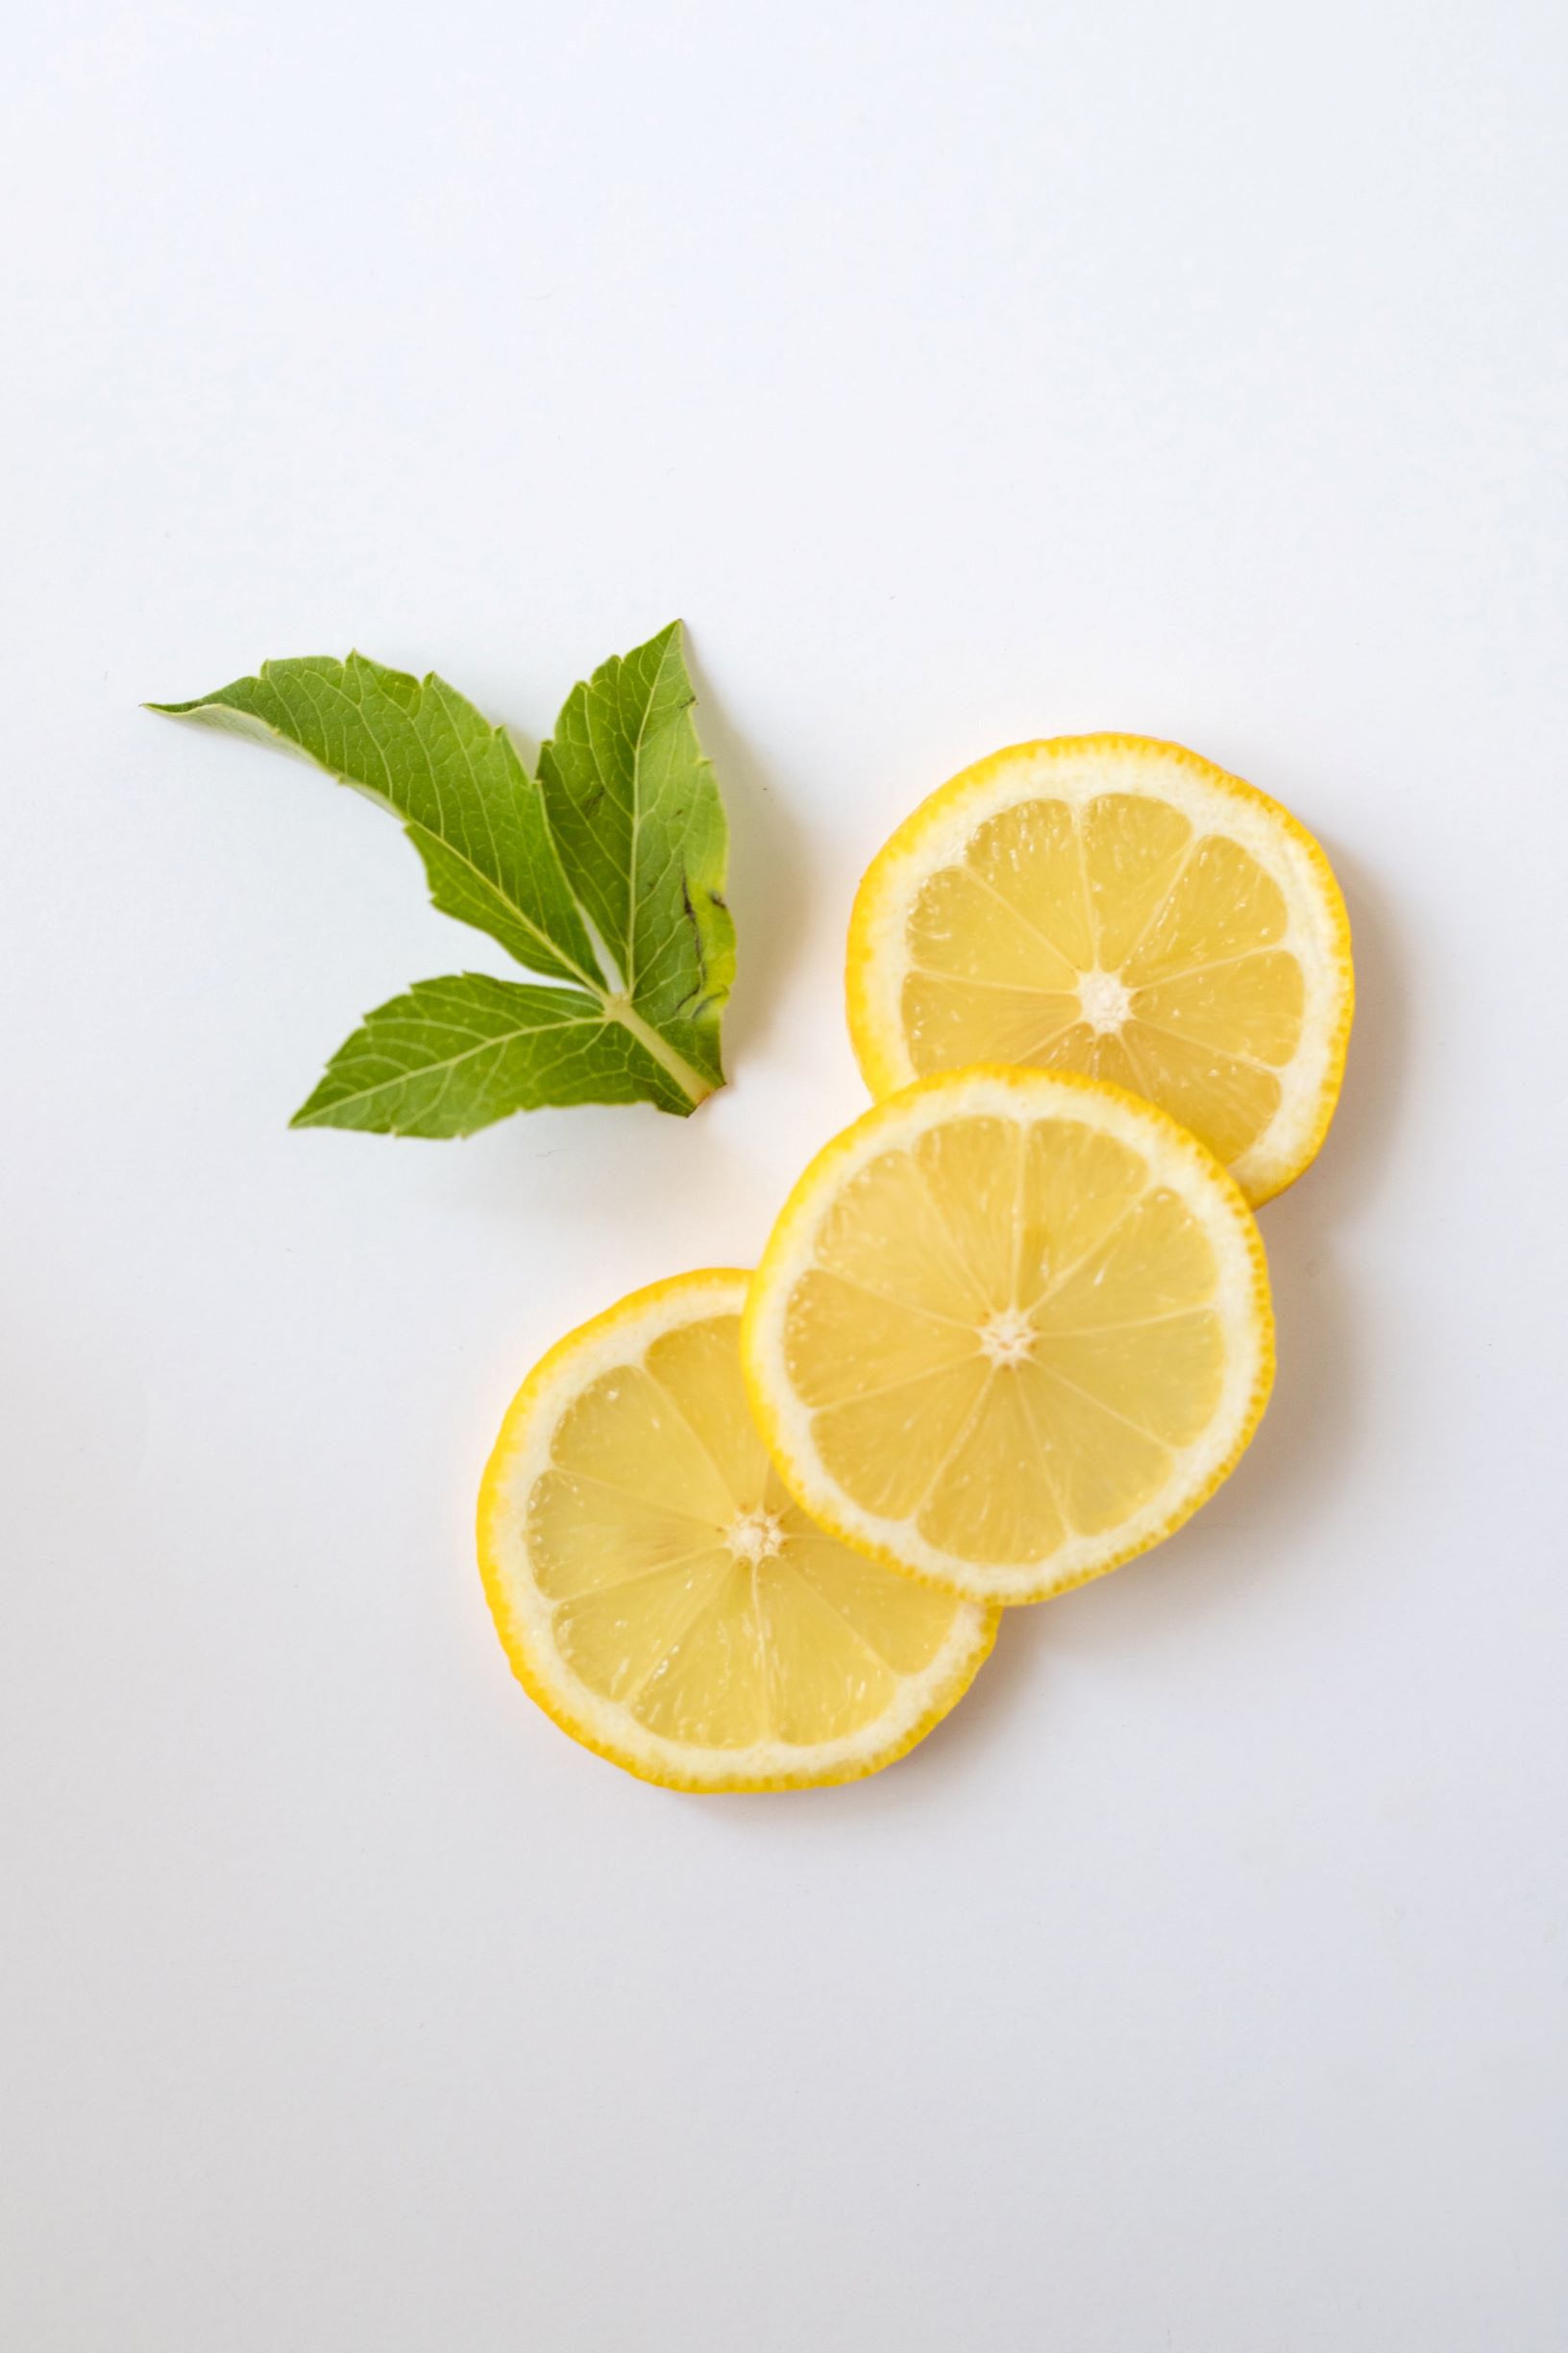 20 must know tips for cleaning with lemon essential oil #essentialoils